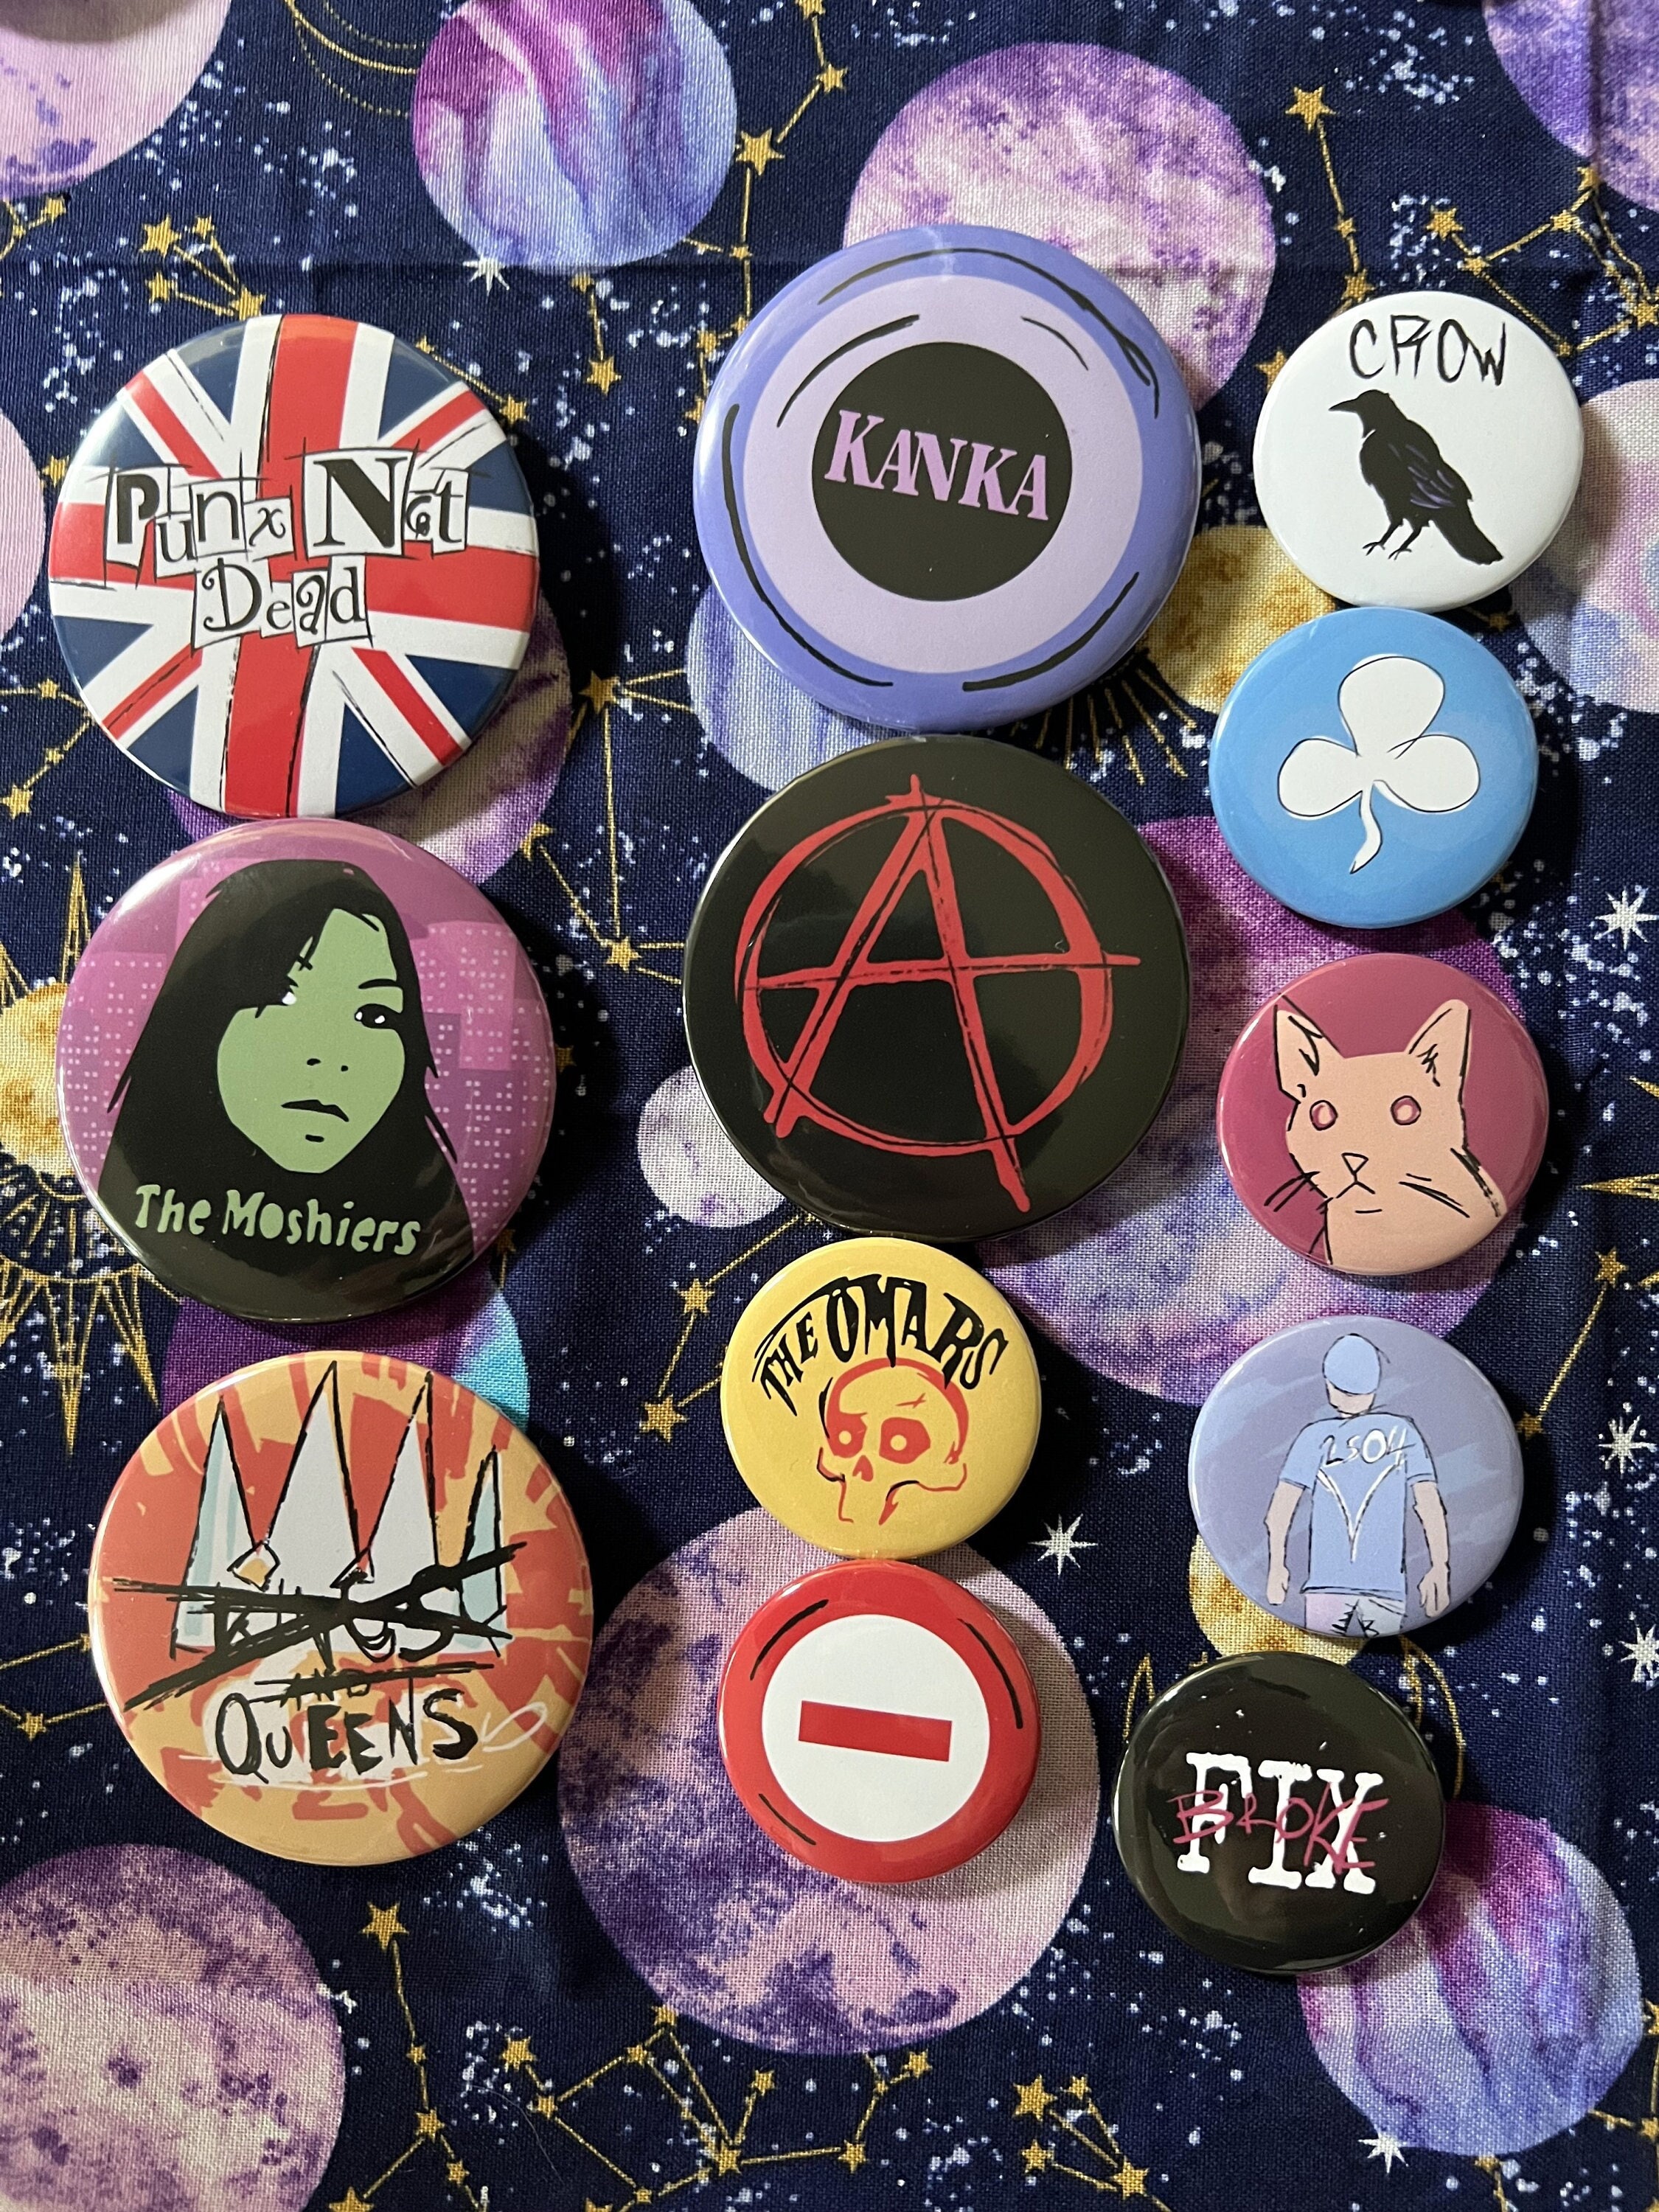 GTOTd Rock and Roll Punk Pins(18 Pack,1.5 inch）Music Band Button Badge Rock  Merch Party for Bag Backpack Jackets Accessories Supplies DIY Crafts Decor